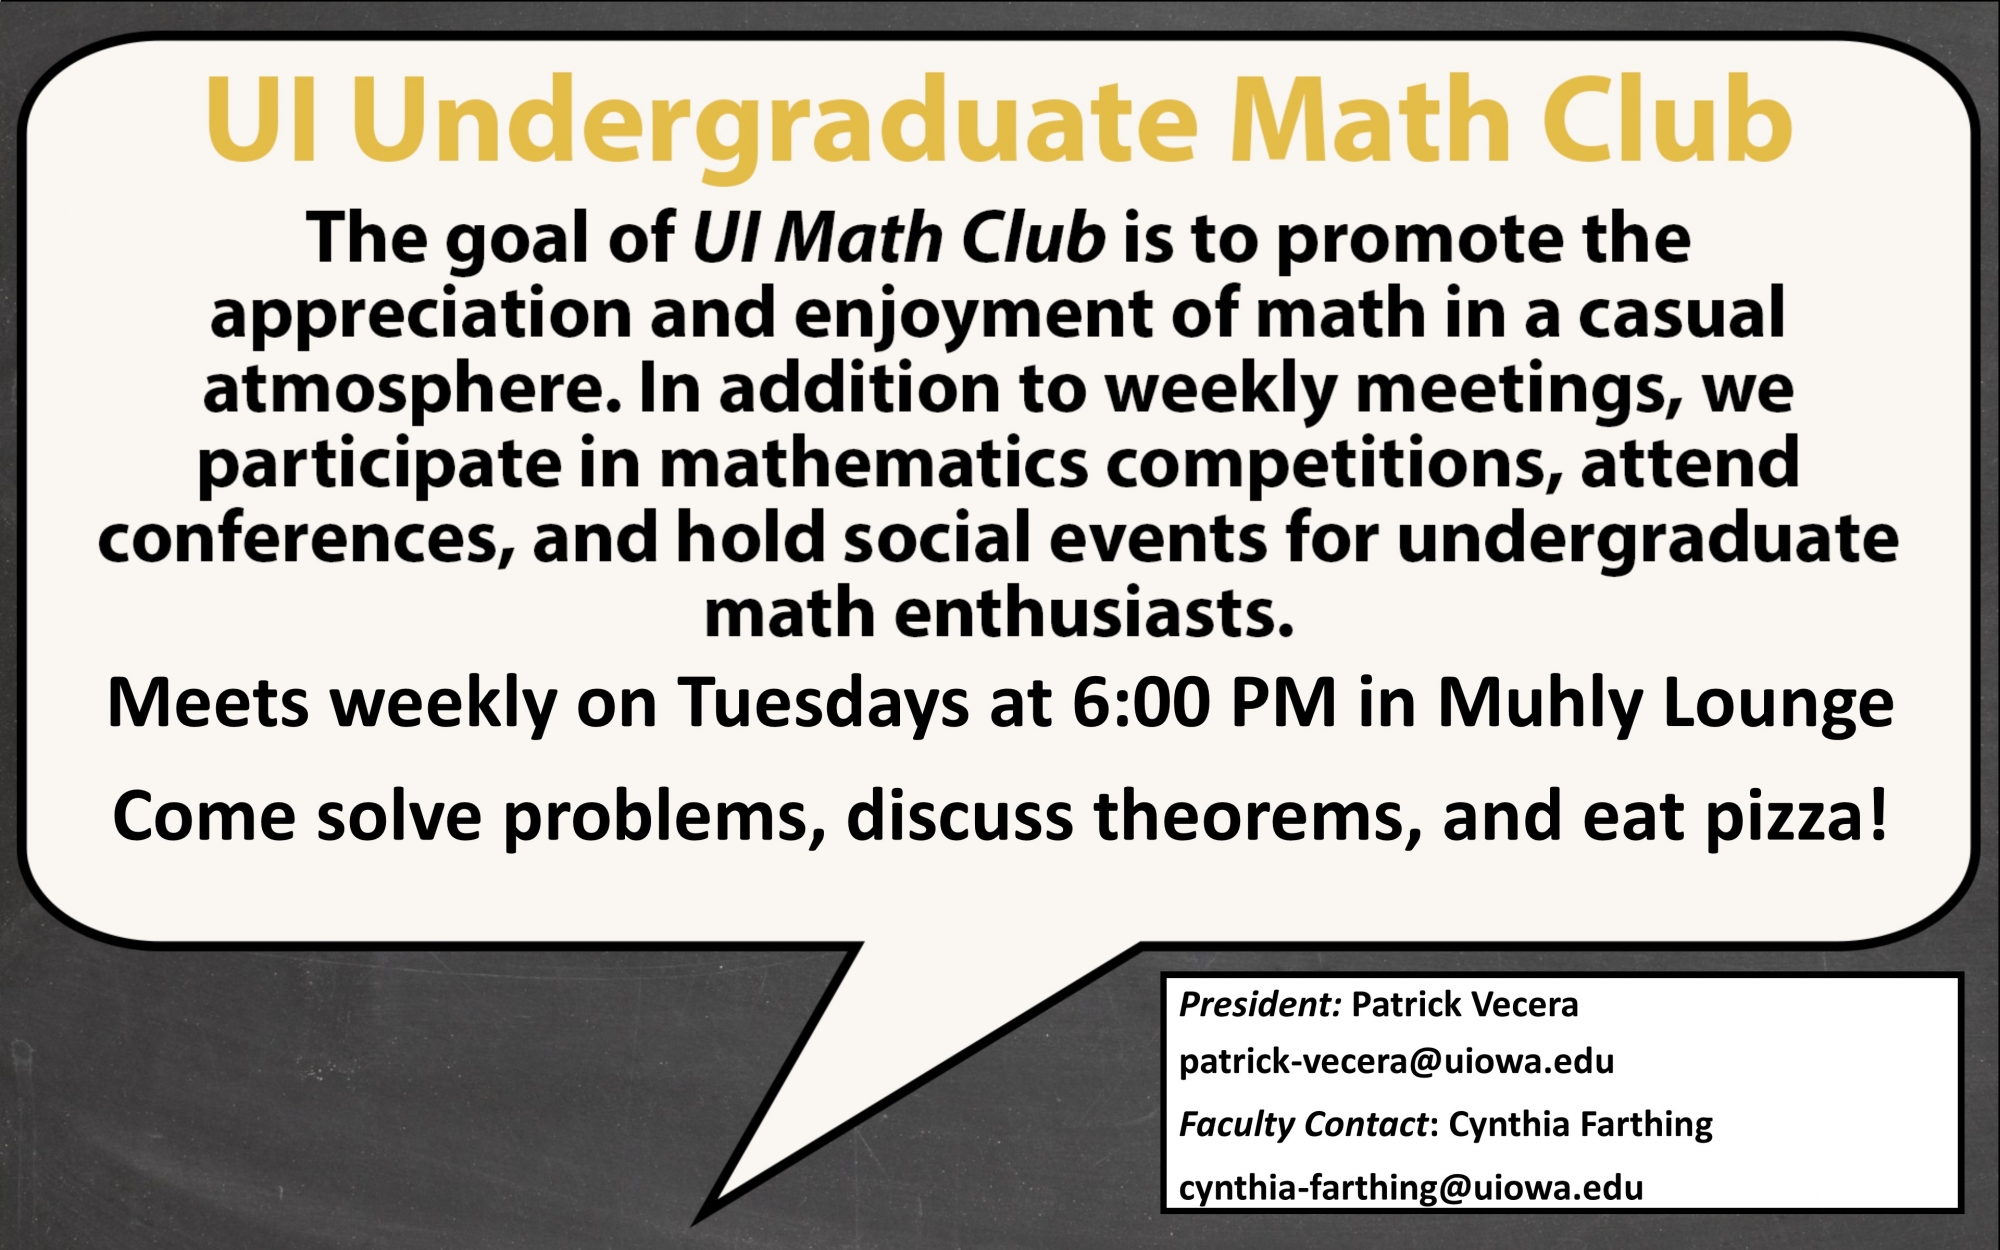 The goal of UI Math Club is to promote the appreciation and enjoyment of math in a casual atmosphere. In addition to weekly meetings, we participate in mathematics competitions, attend conferences, and hold social events for undergraduate math enthusiasts.                                                                                                                                                                                                                                                                                      Meetings are held every week, which will be normally on Mondays, 6:00pm. Food provided every other meeting. President: Patrick Vecera patrick-vecera@uiowa.edu Faculty Contact: Cynthia Farthing cynthia-farthing@uiowa.edu